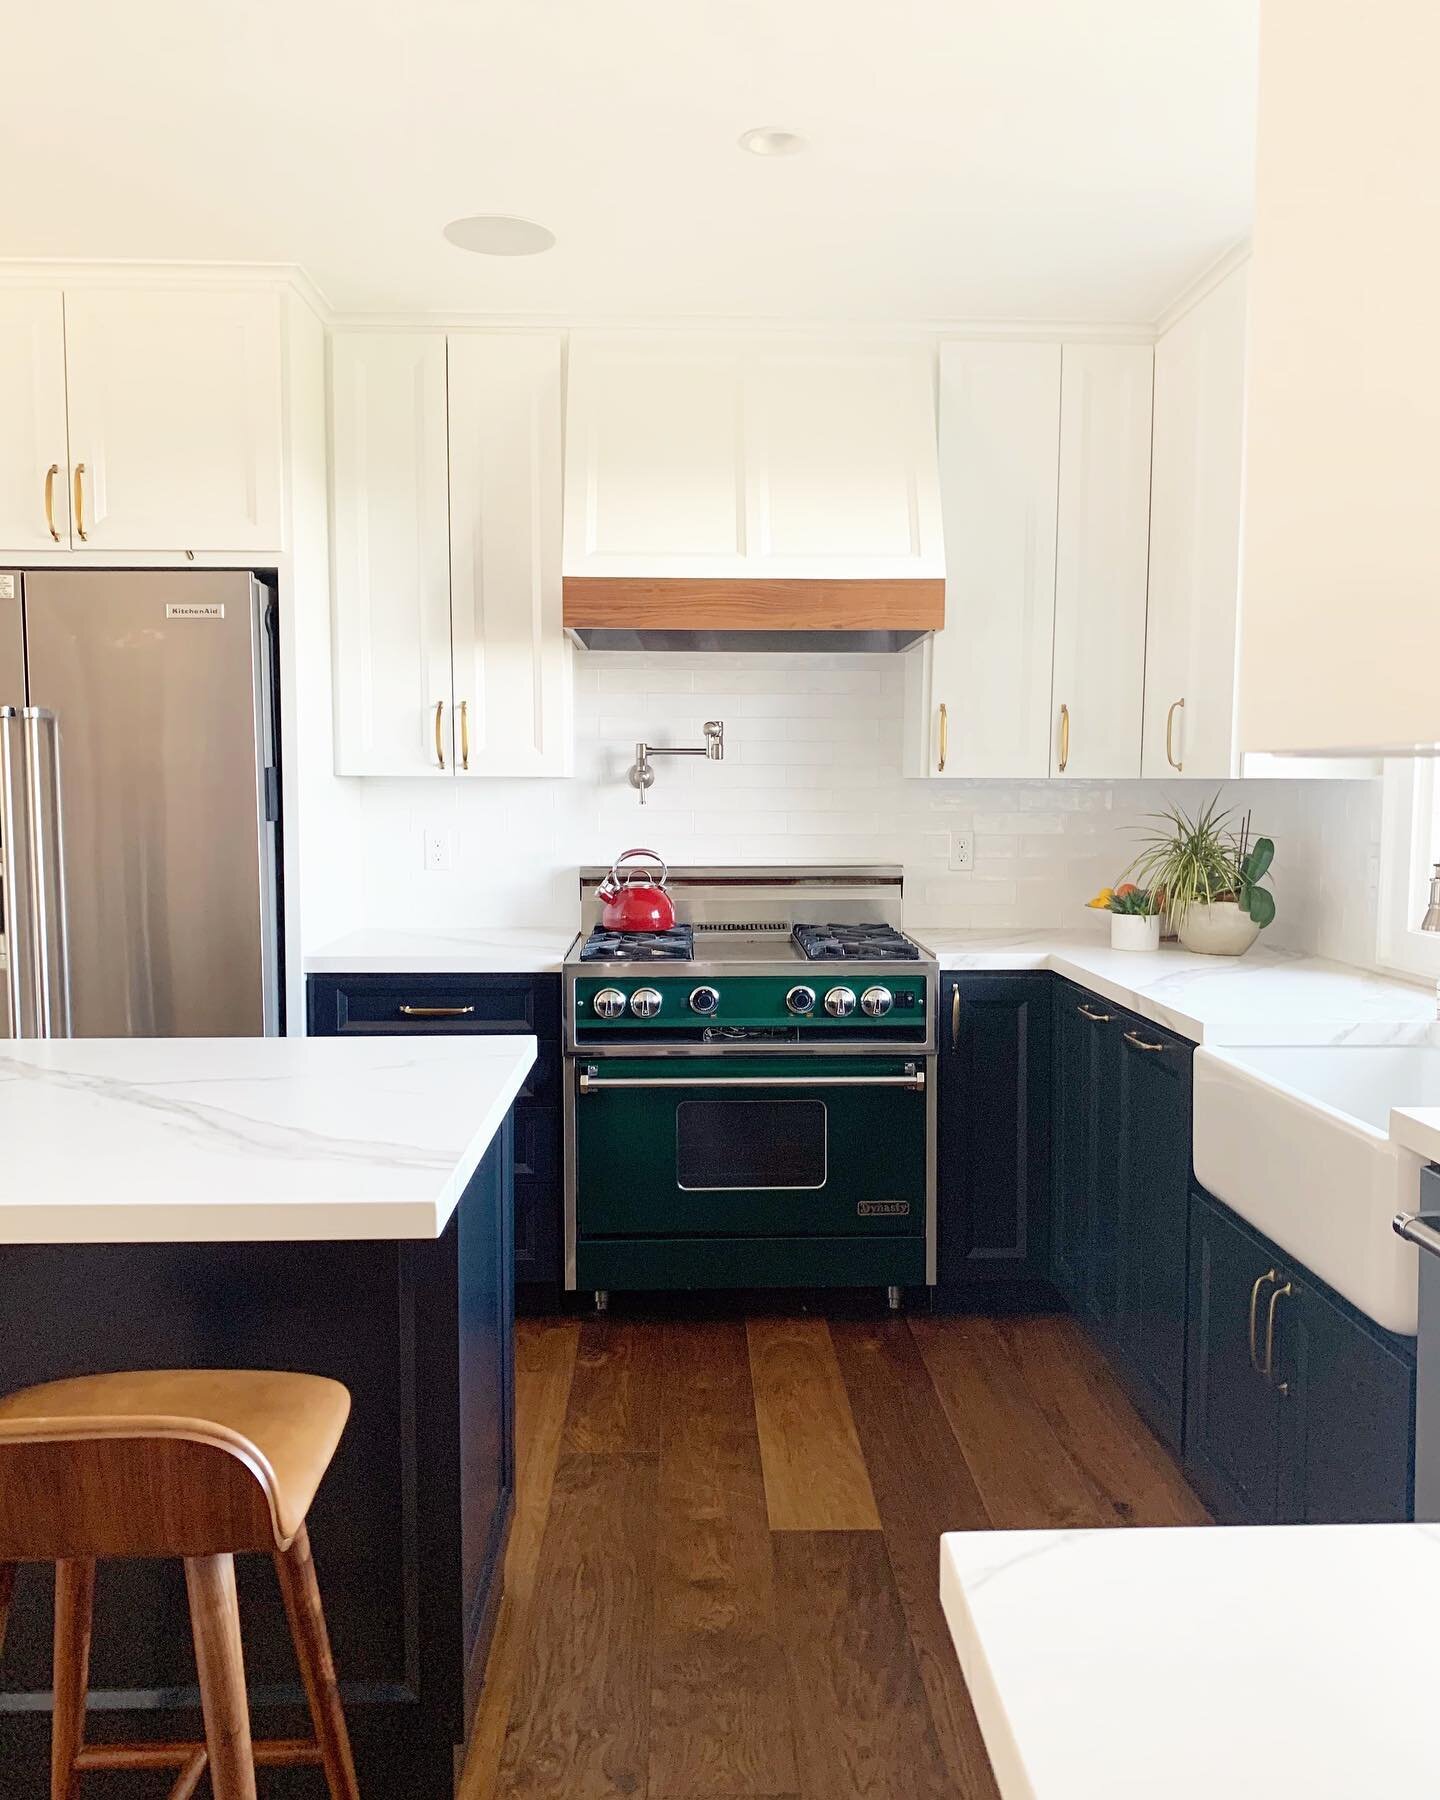 Knocked down a couple of walls but other than that this kitchen remodel was pretty straightforward: preserve the rustic charm of the house, add storage, and keep the stove (but nothing else😉)